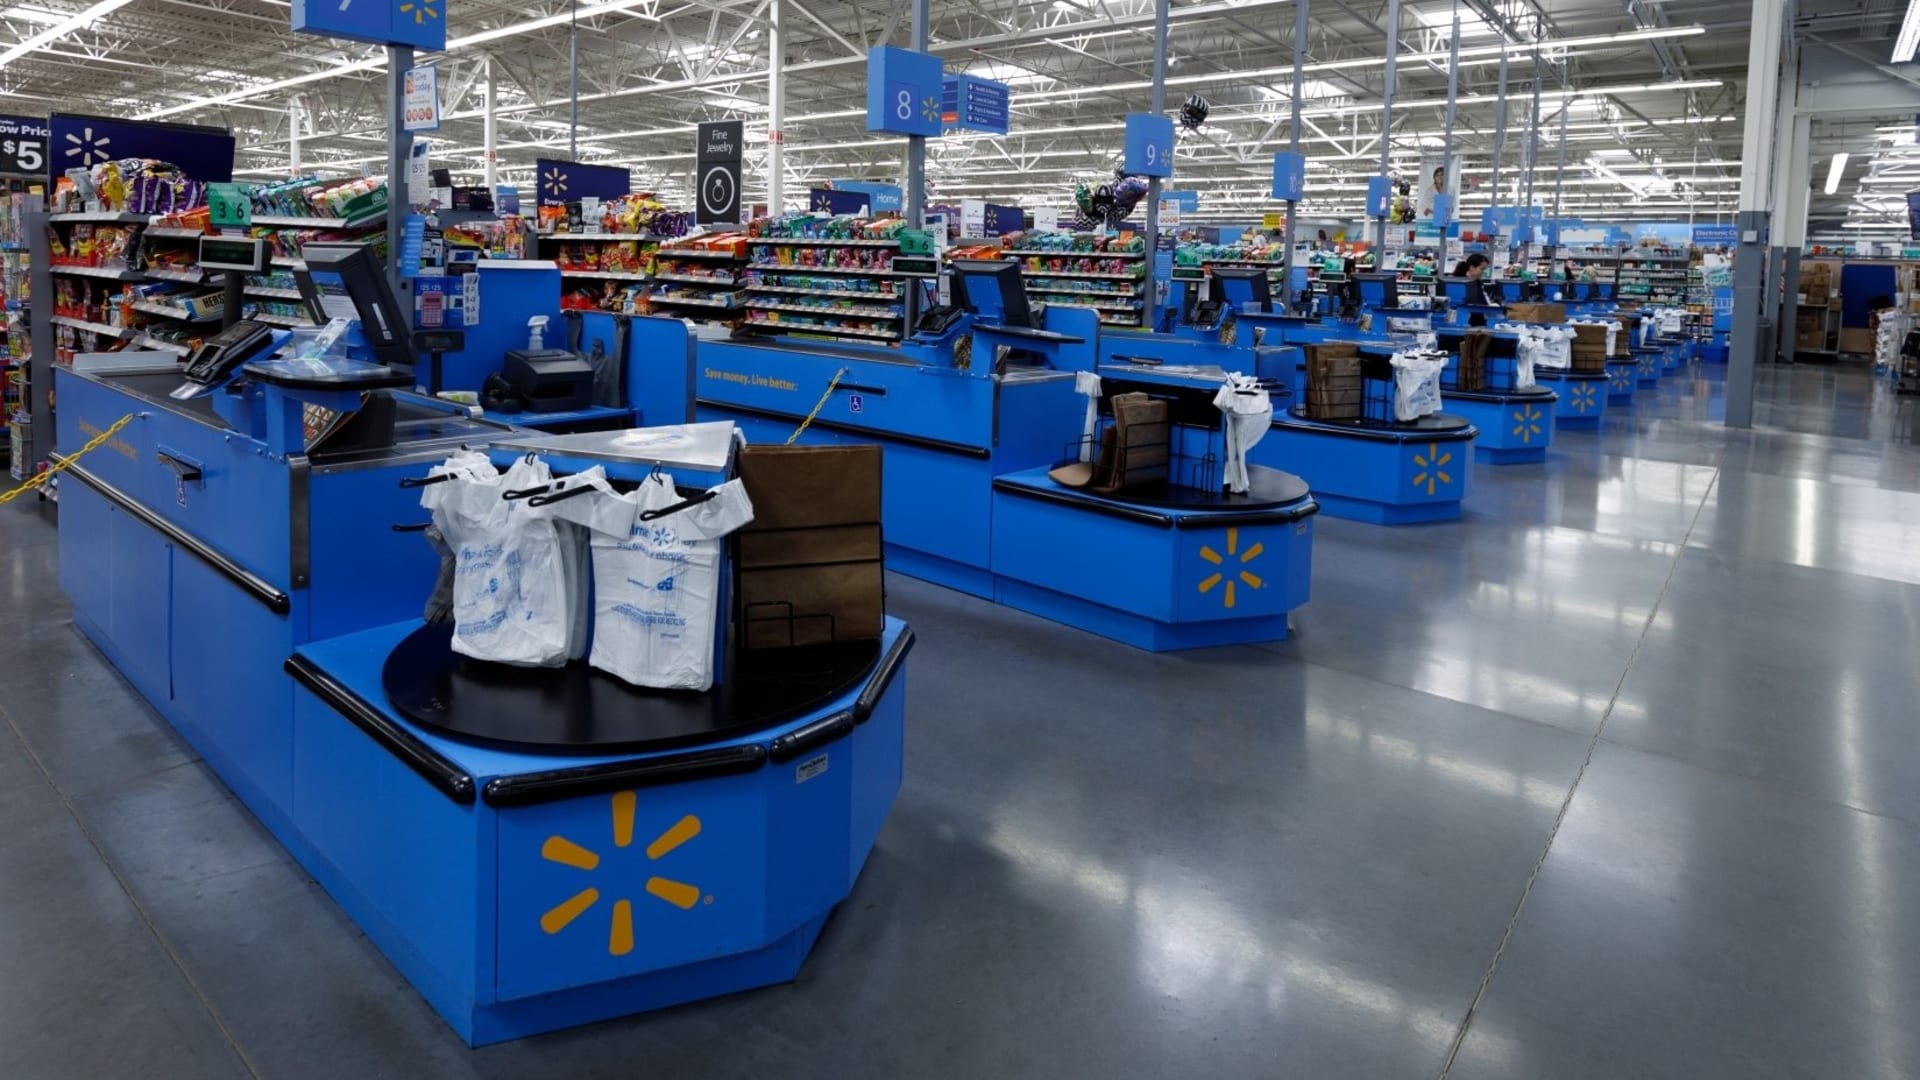 Walmart Just Announced It's Changing a 30-Year Tradition. Here's What Customers Are Saying